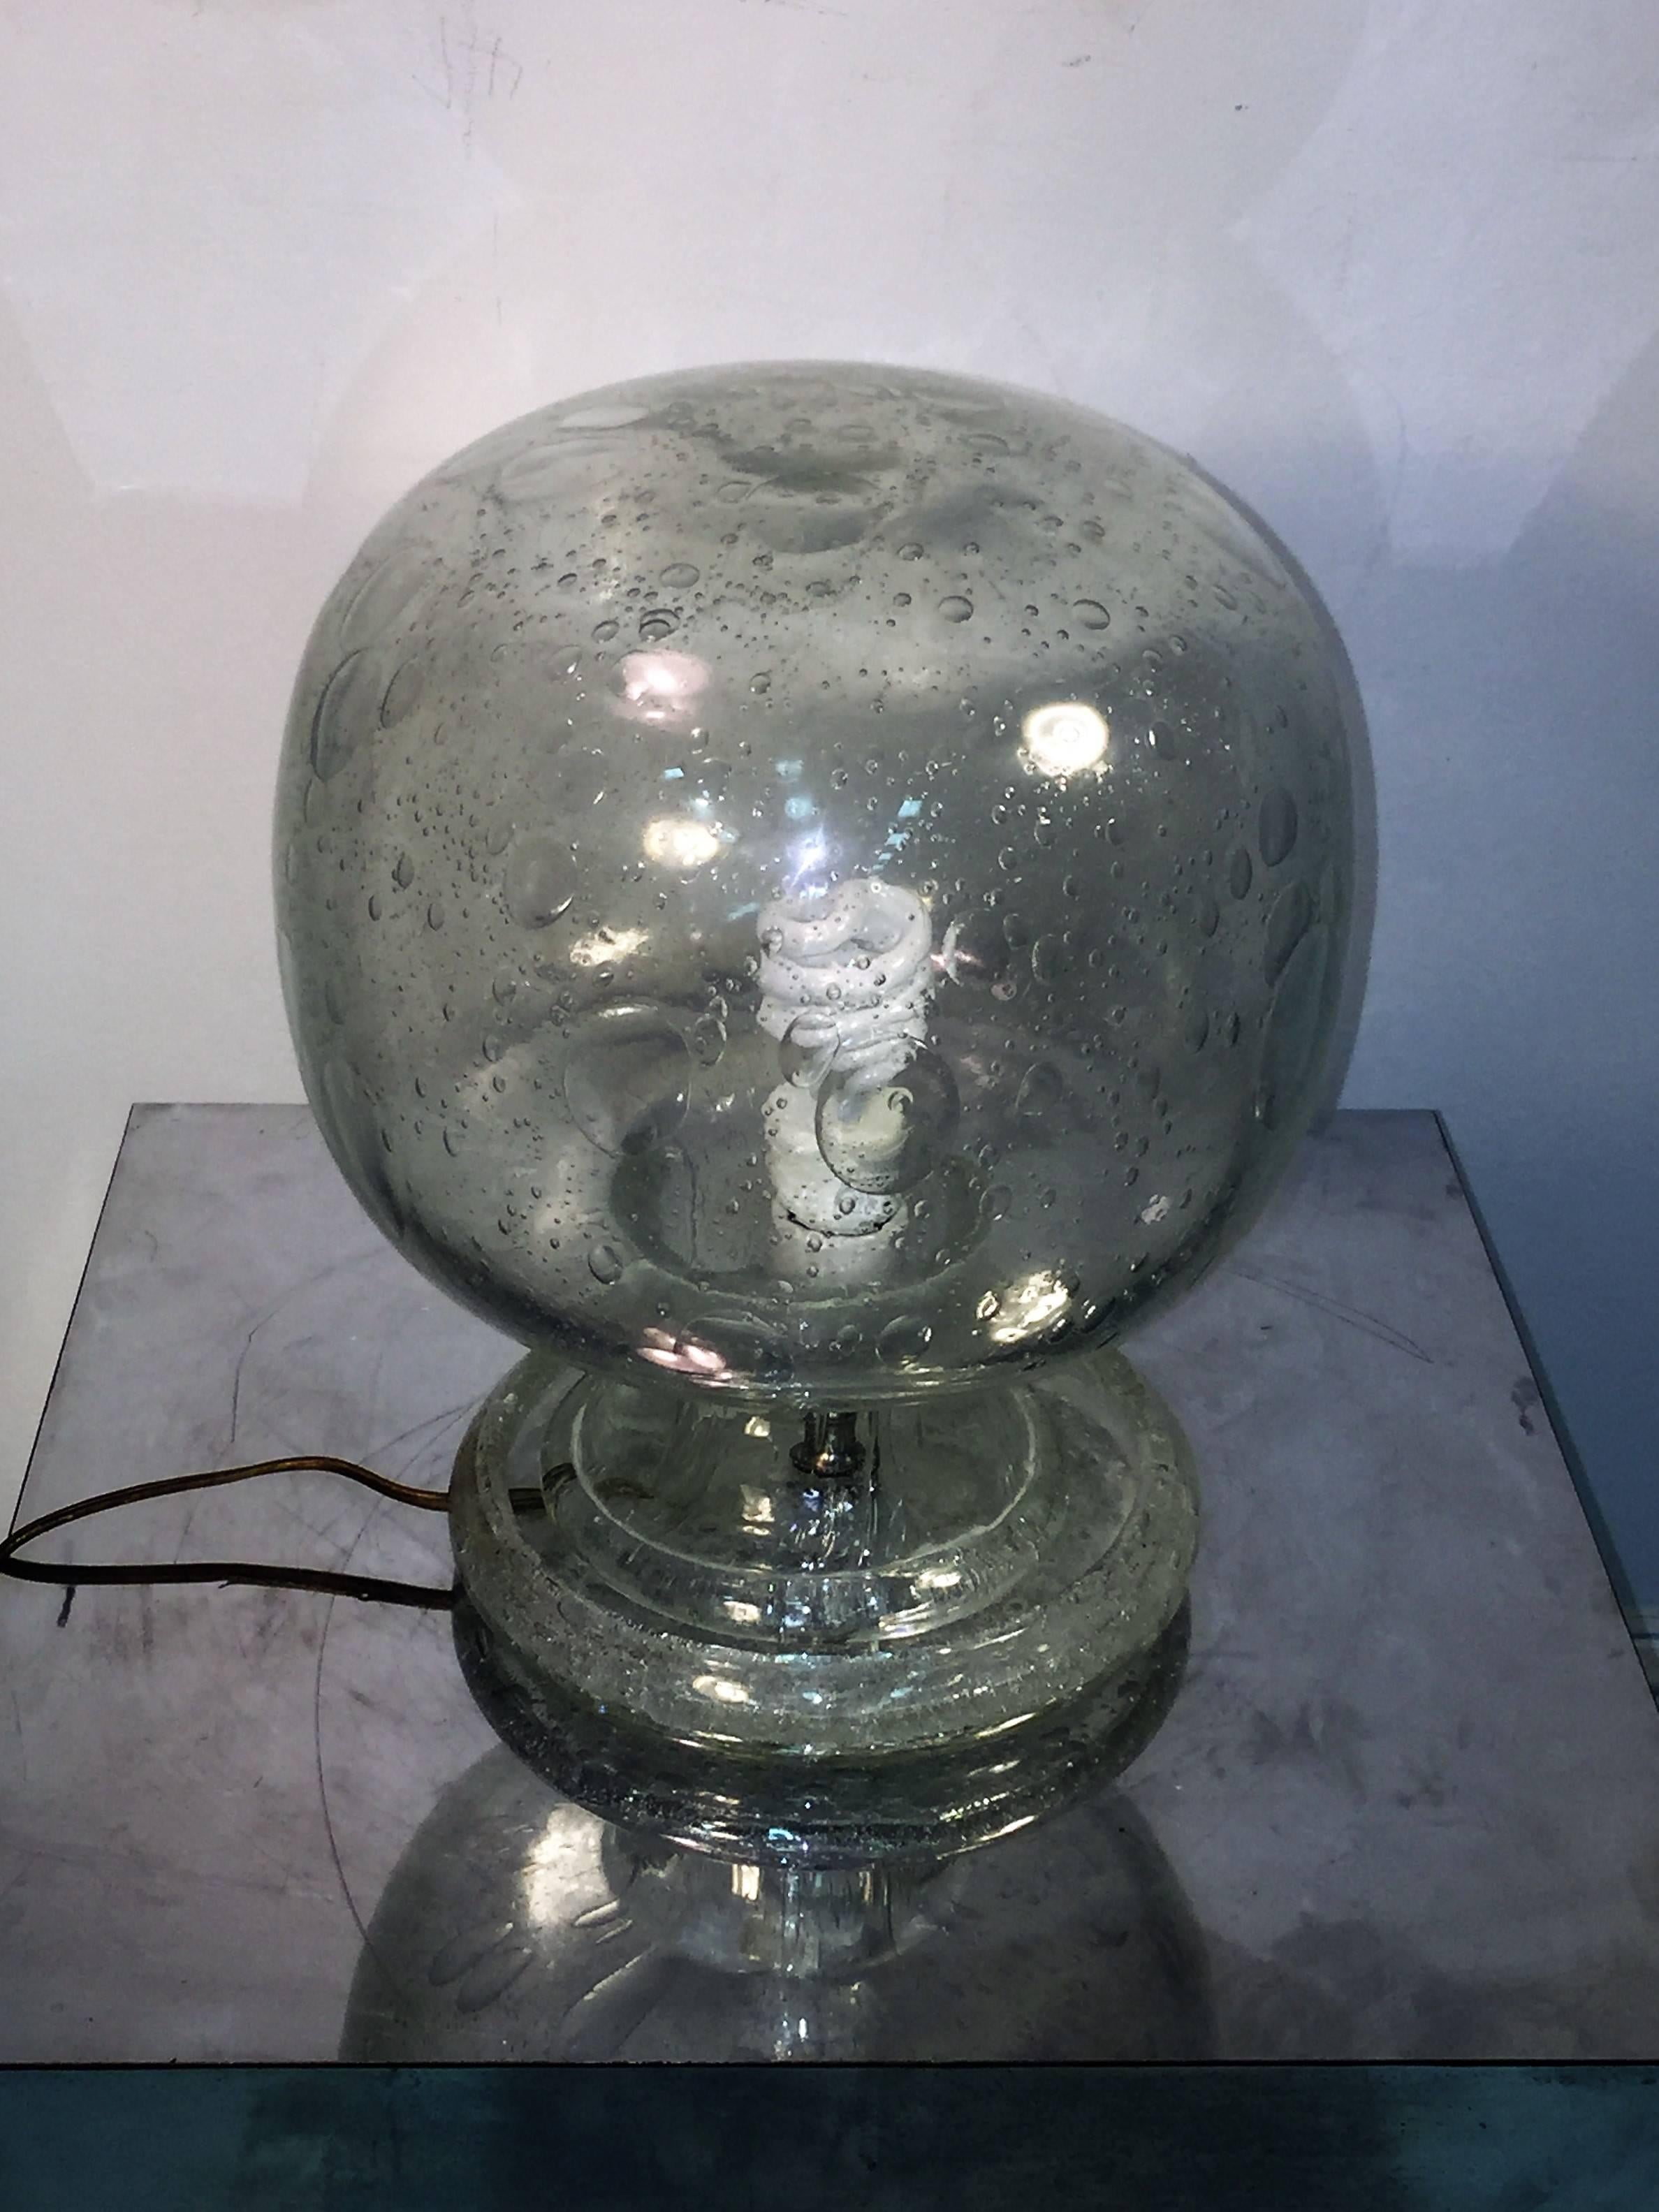 Stunning thick handblown Molten bubble design Murano glass table lamp by Alfredo Barbini for Cenedese in the 1970s. A great modern design that encompasses both Illumination and glass sculpture. The measurements of the base are 8